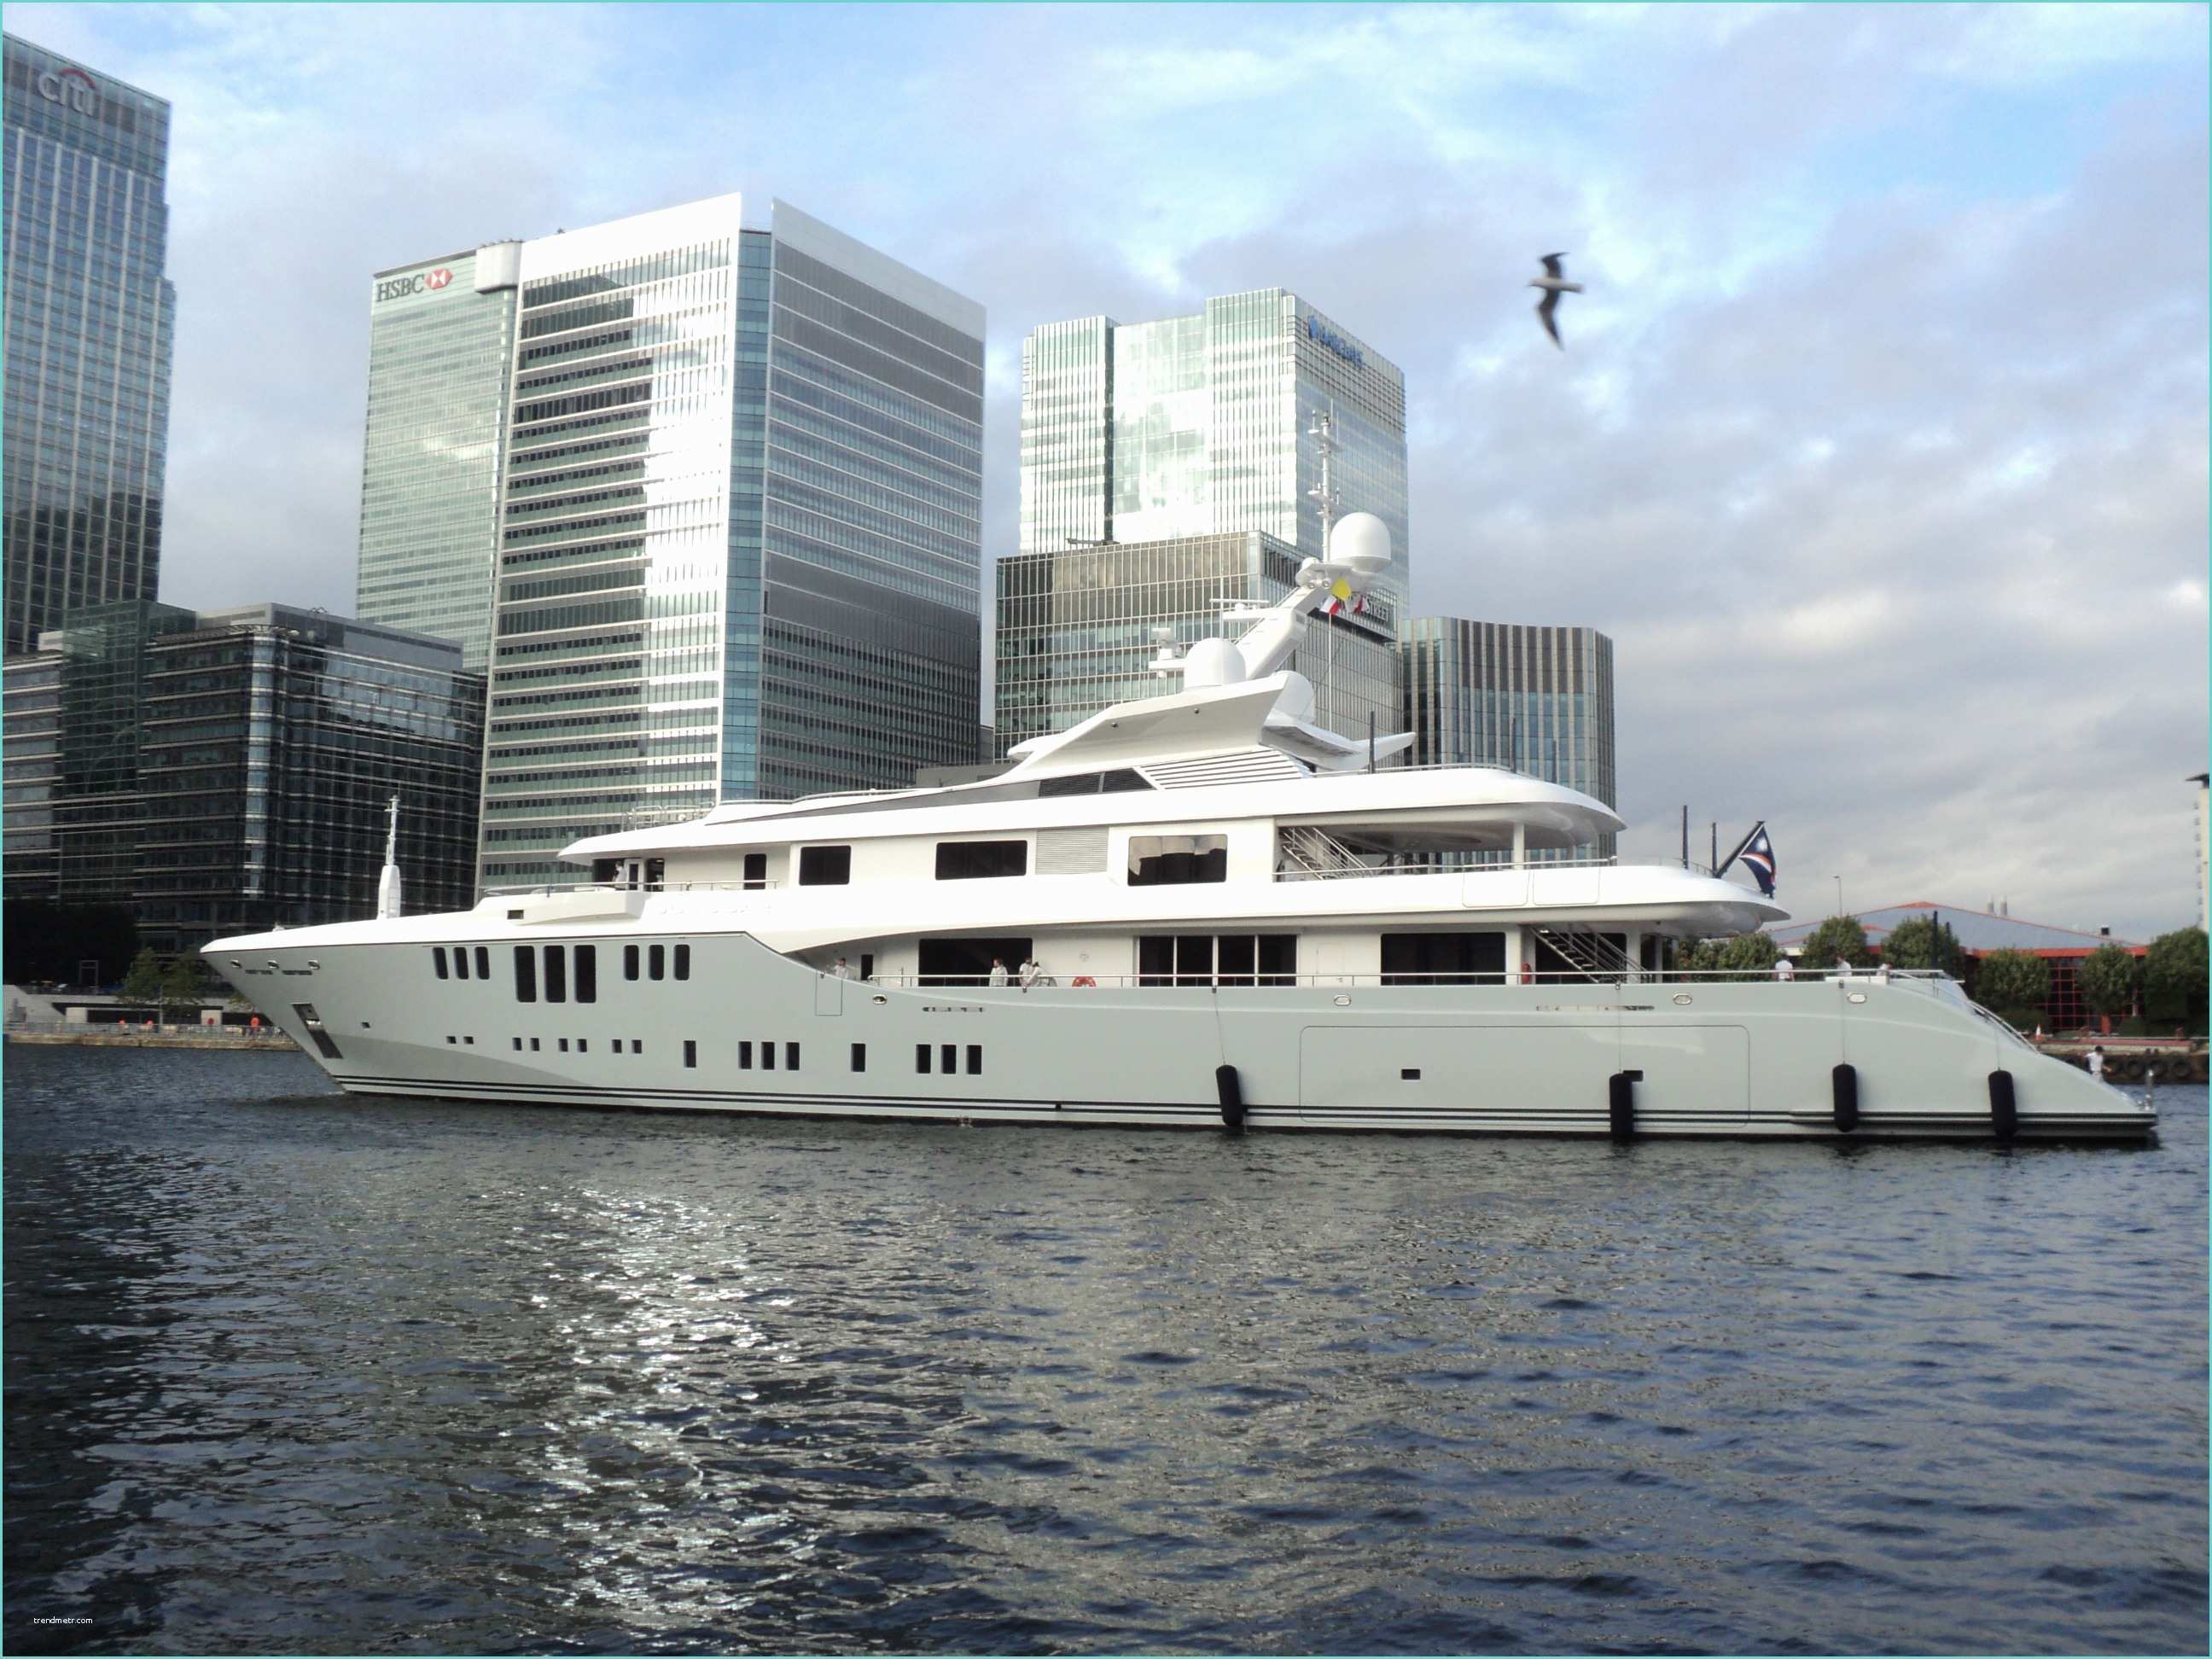 Chaufelec Odessa 2 Super Yacht Odessa Ii In West India Dock isle Of Dogs Life